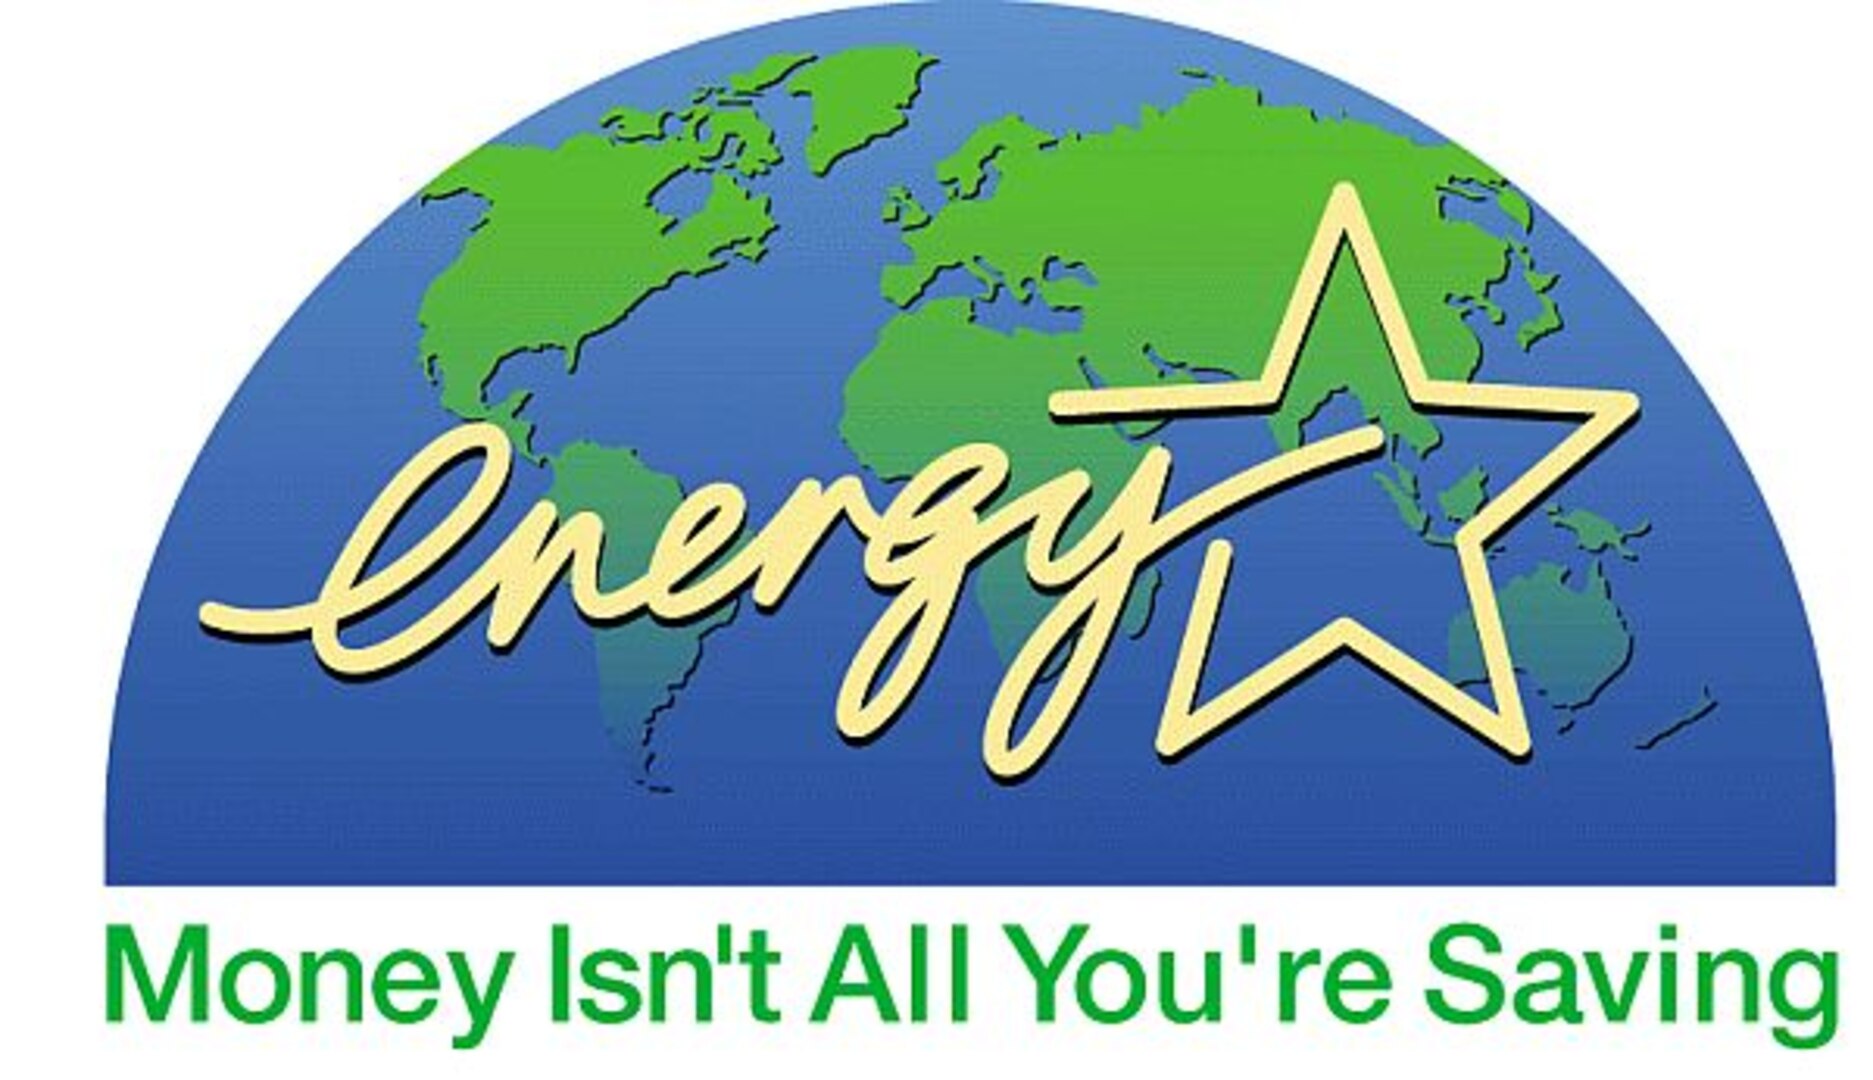 Consumers should strive to be as energy effecient as possible.